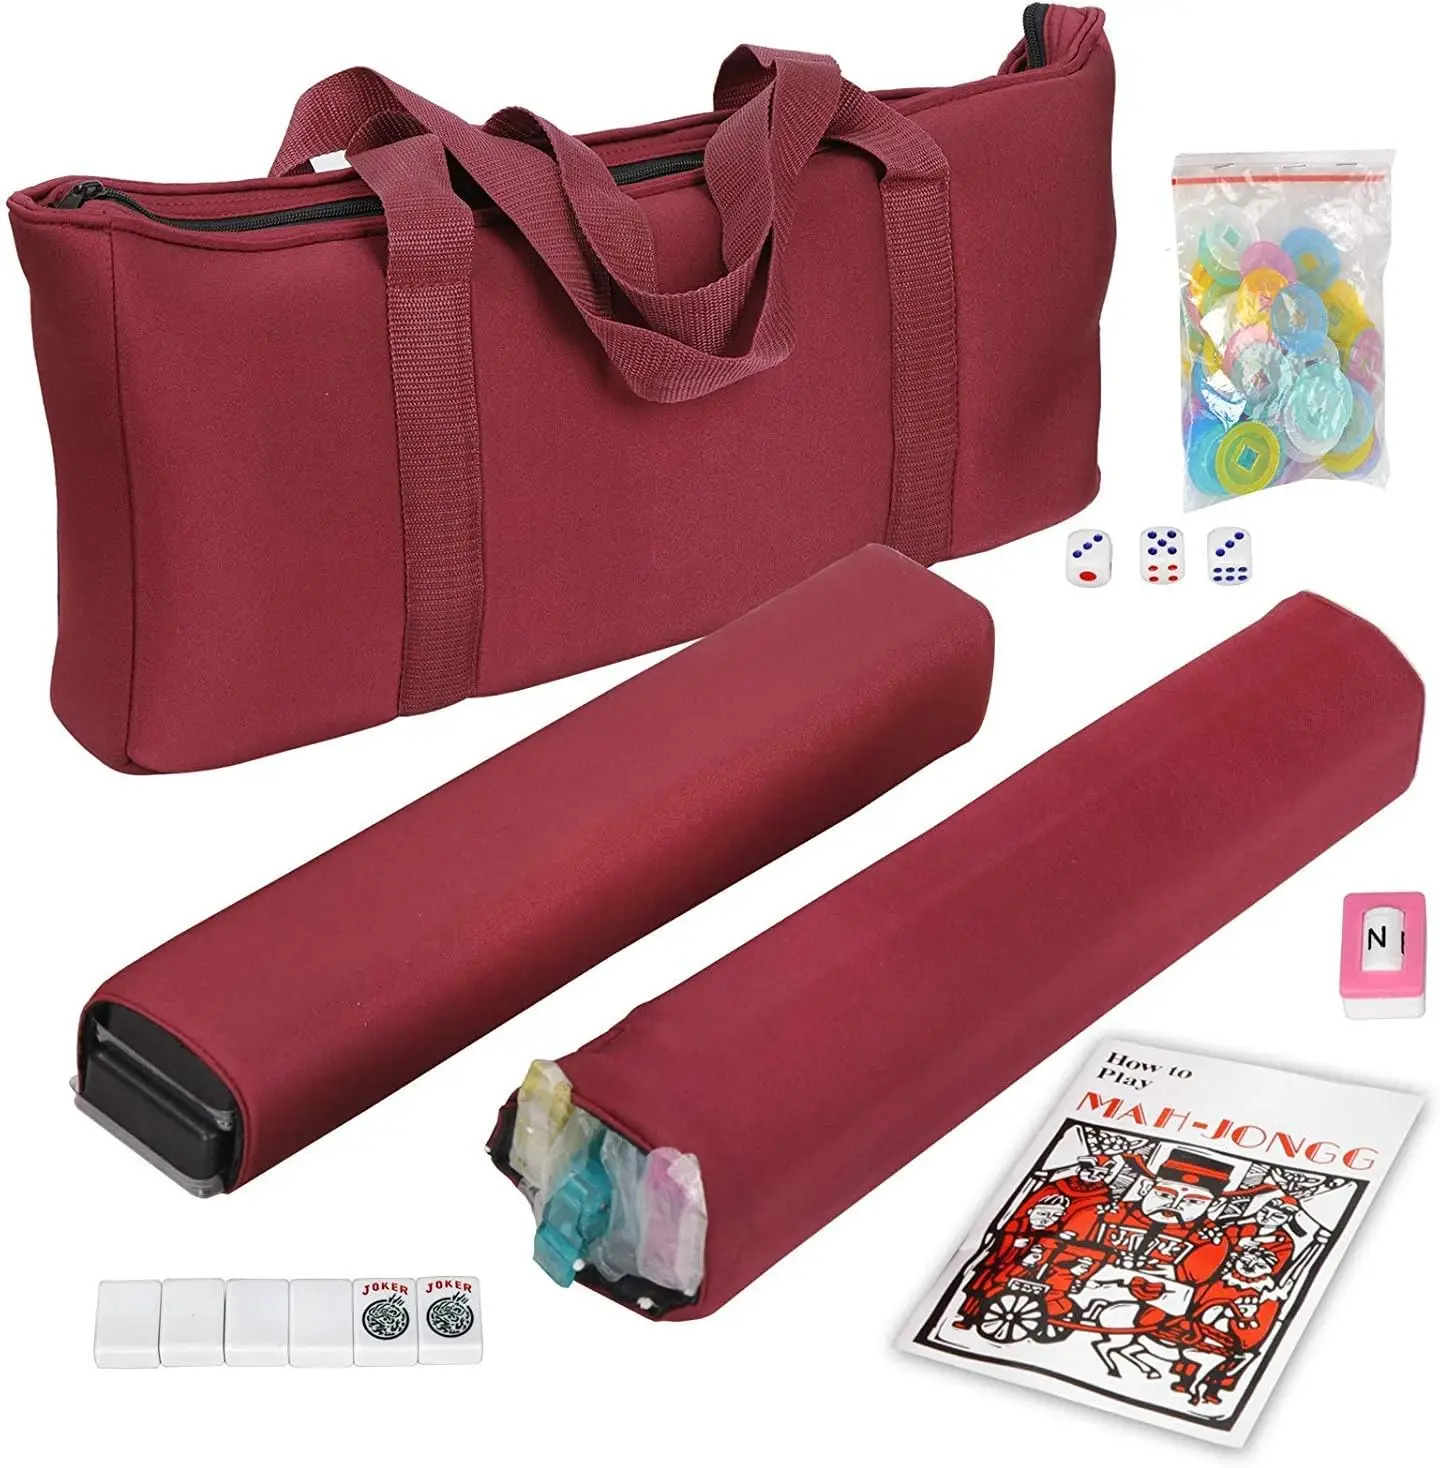 

American Mah Jongg Mahjong Set 166 Tiles, 4 Colors All-in-One Rack/Pushers, Red Soft Bag and Accessories \u2013Classic Full Size